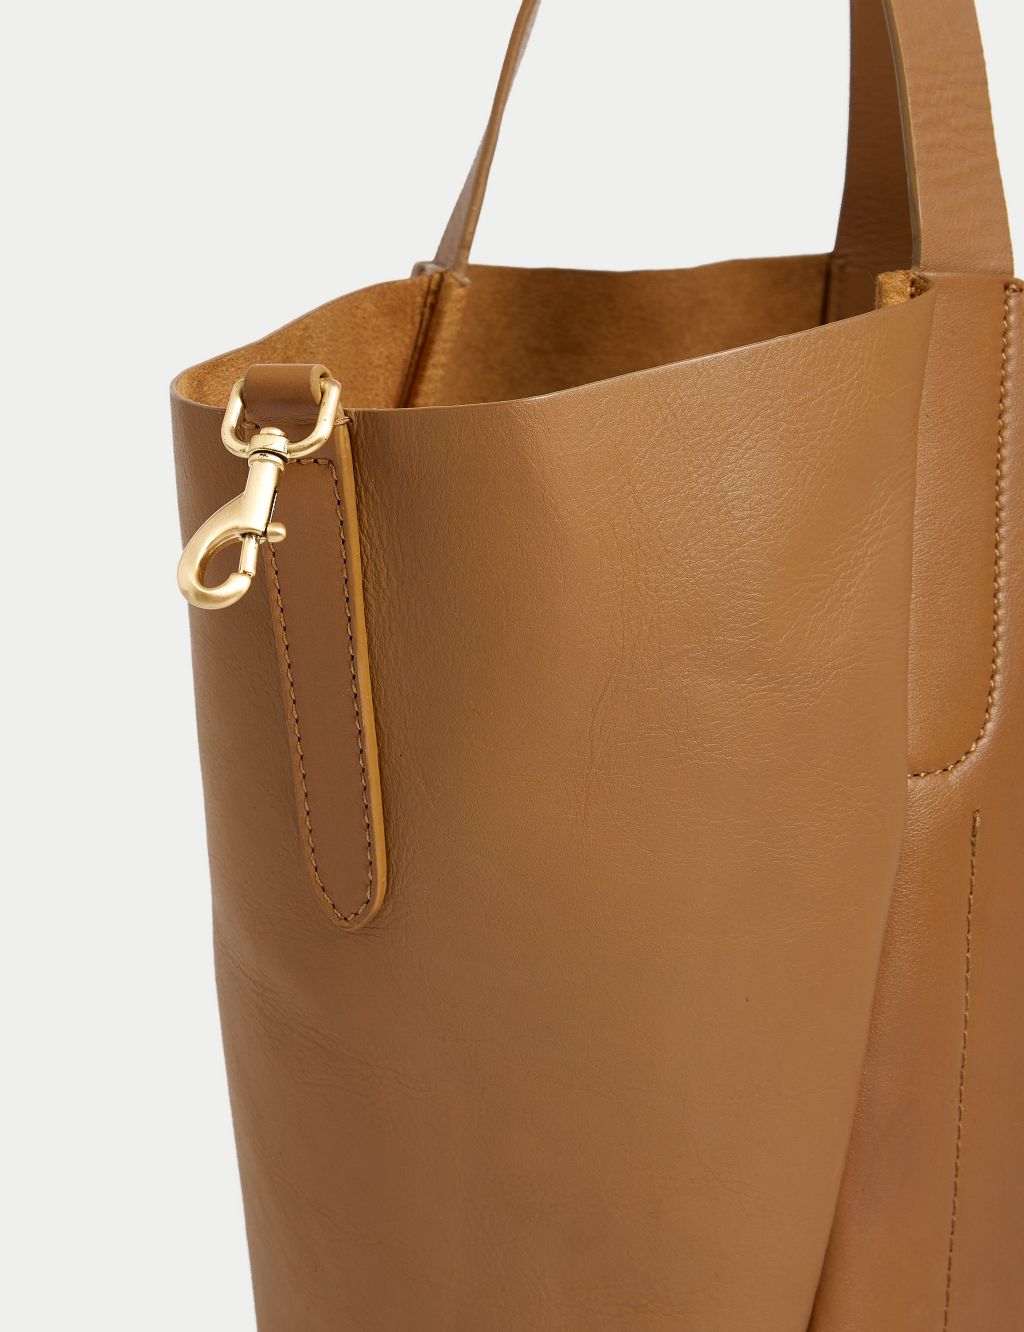 Leather Tote Bag image 2